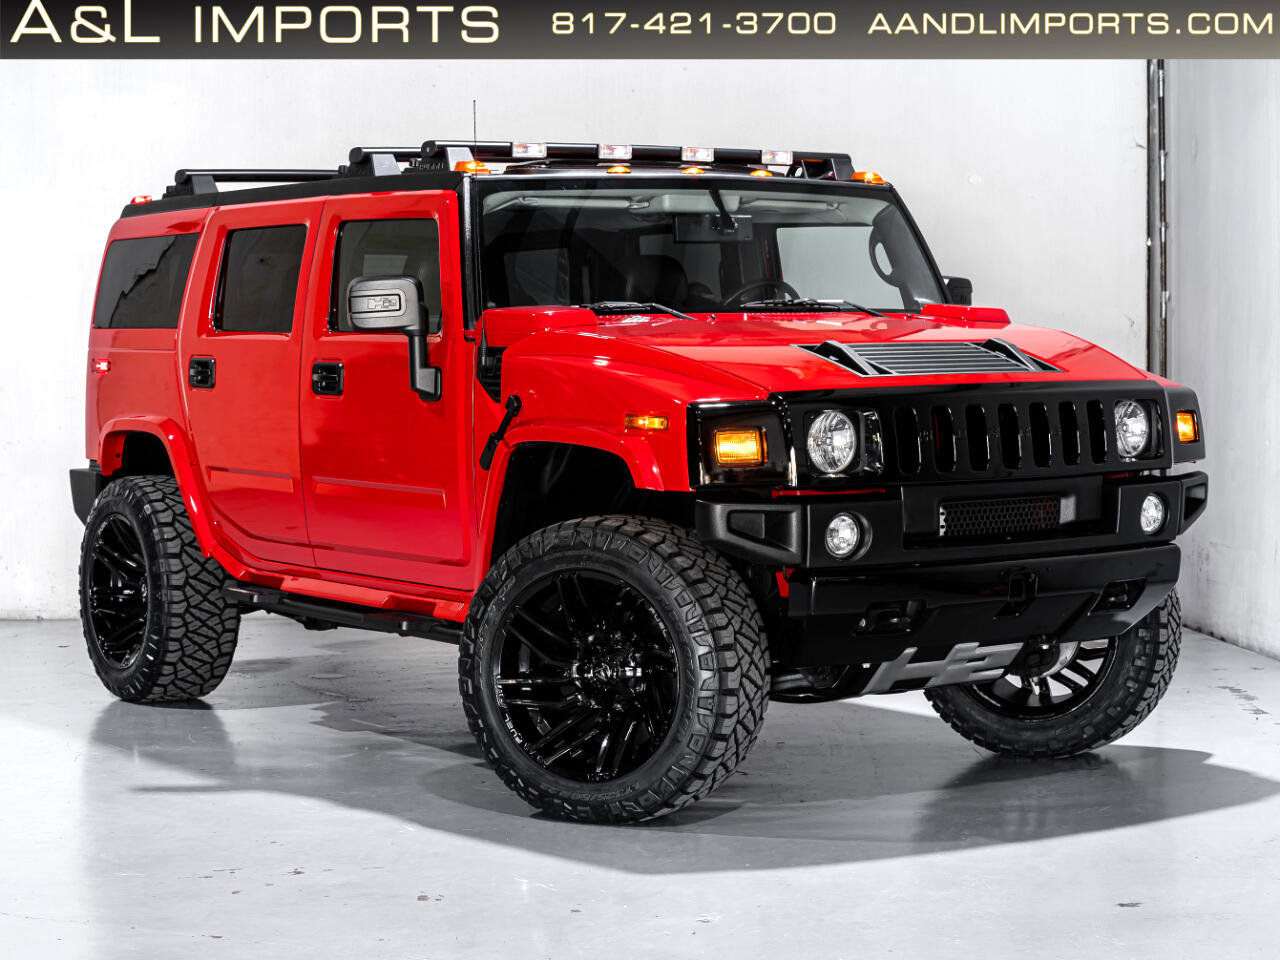 Used 2007 HUMMER H2 for Sale Right Now - Autotrader